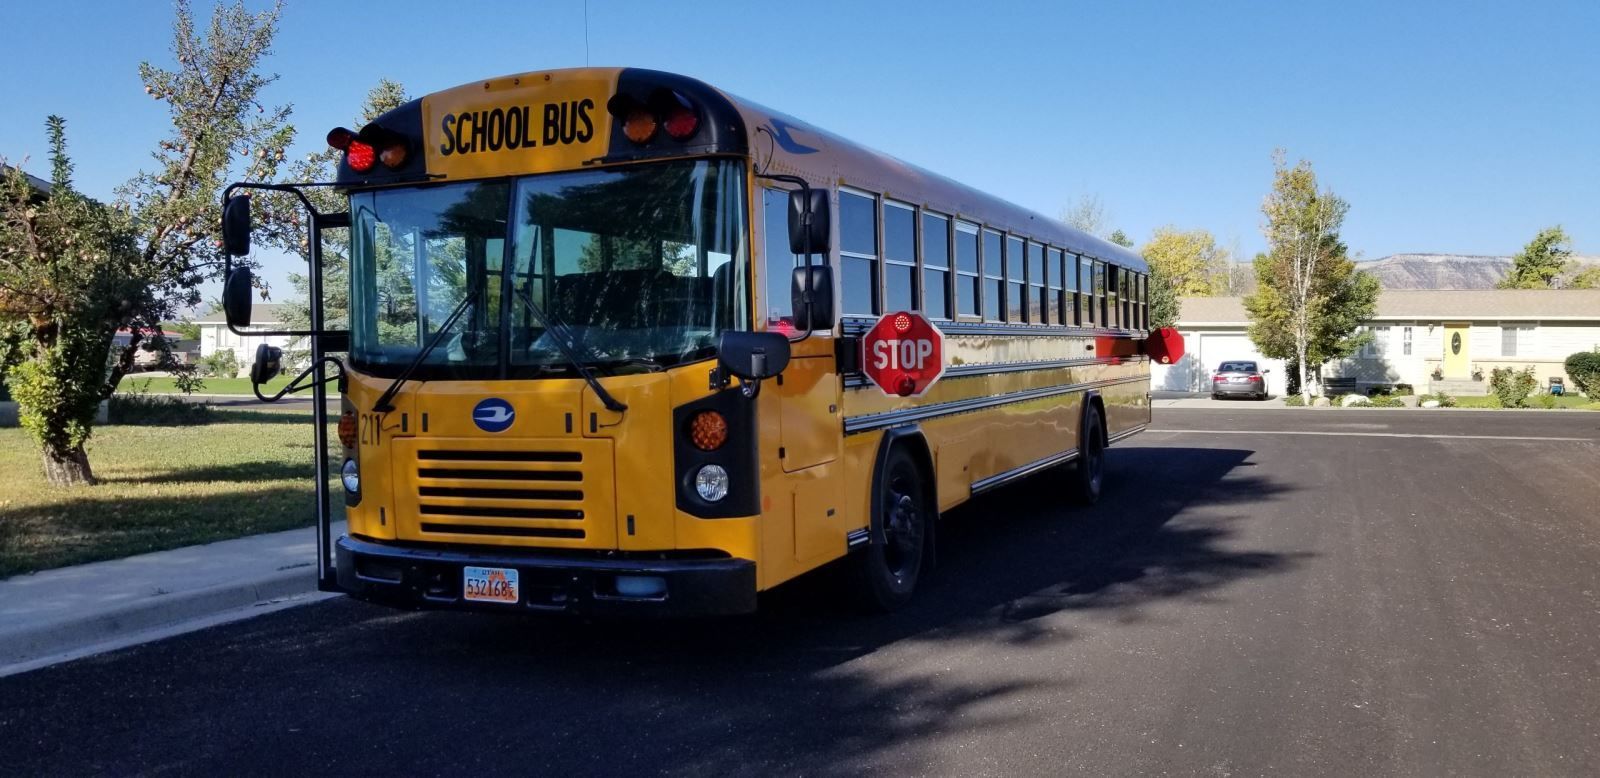 A yellow school bus is parked on the side of the road.